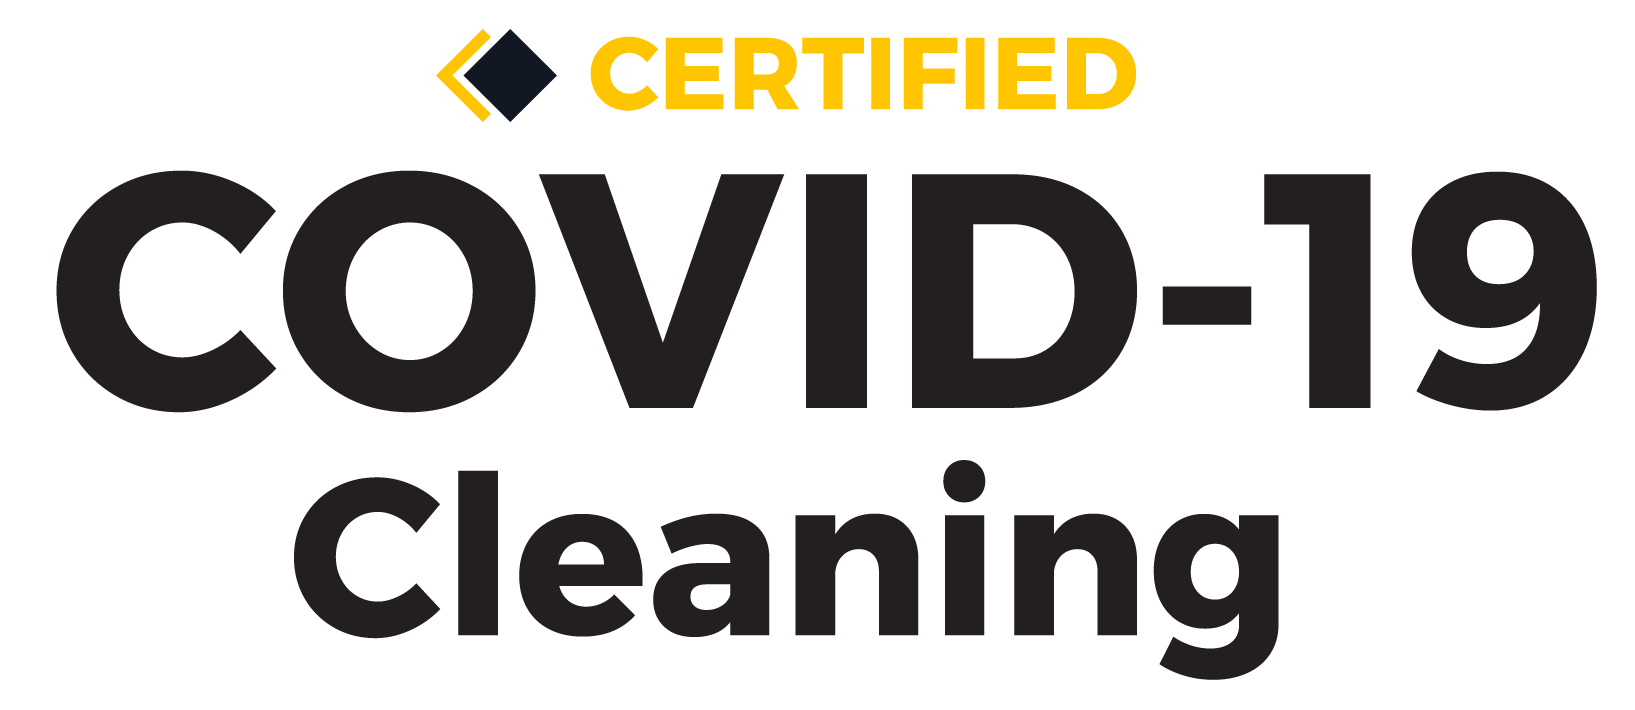 Certified COVID-19 Cleaning